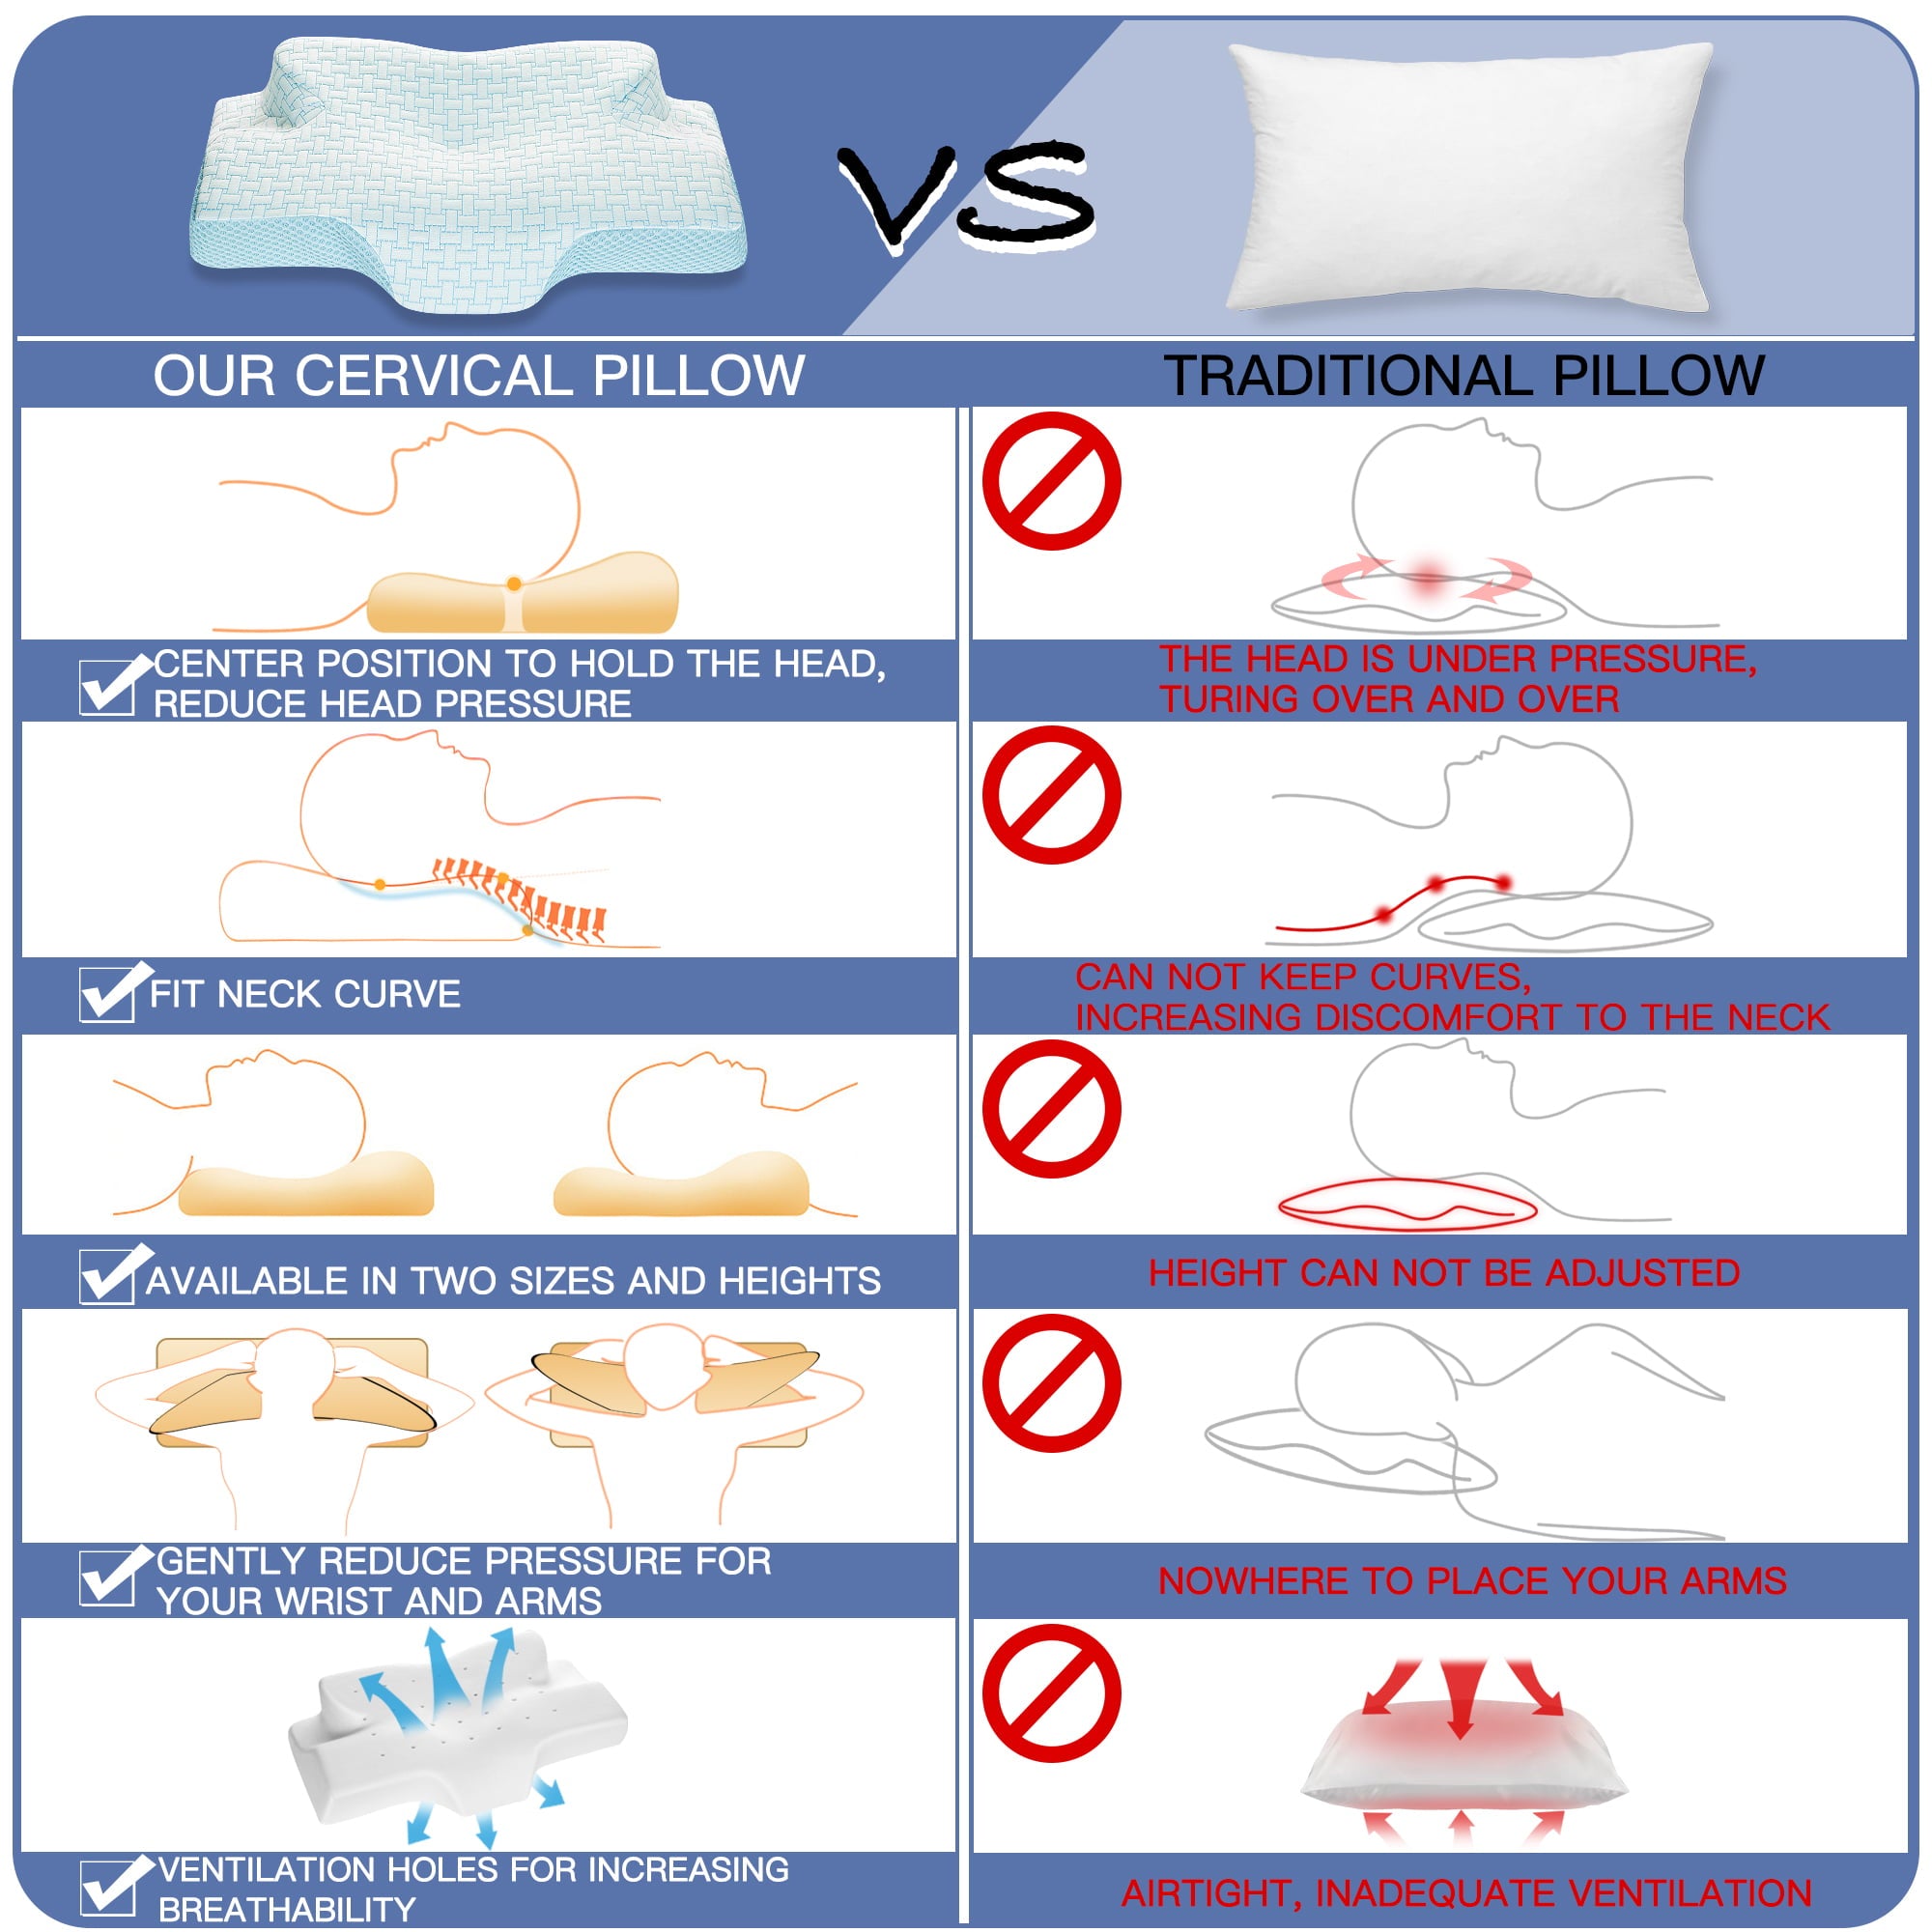 Elviros Memory Foam Cervical Pillow, Ergonomic Contour Pillow for Neck and Shoulder Pain Relief, Orthopedic Sleeping Bed Pillows for Side Sleepers, Back and Stomach Sleepers (Blue)